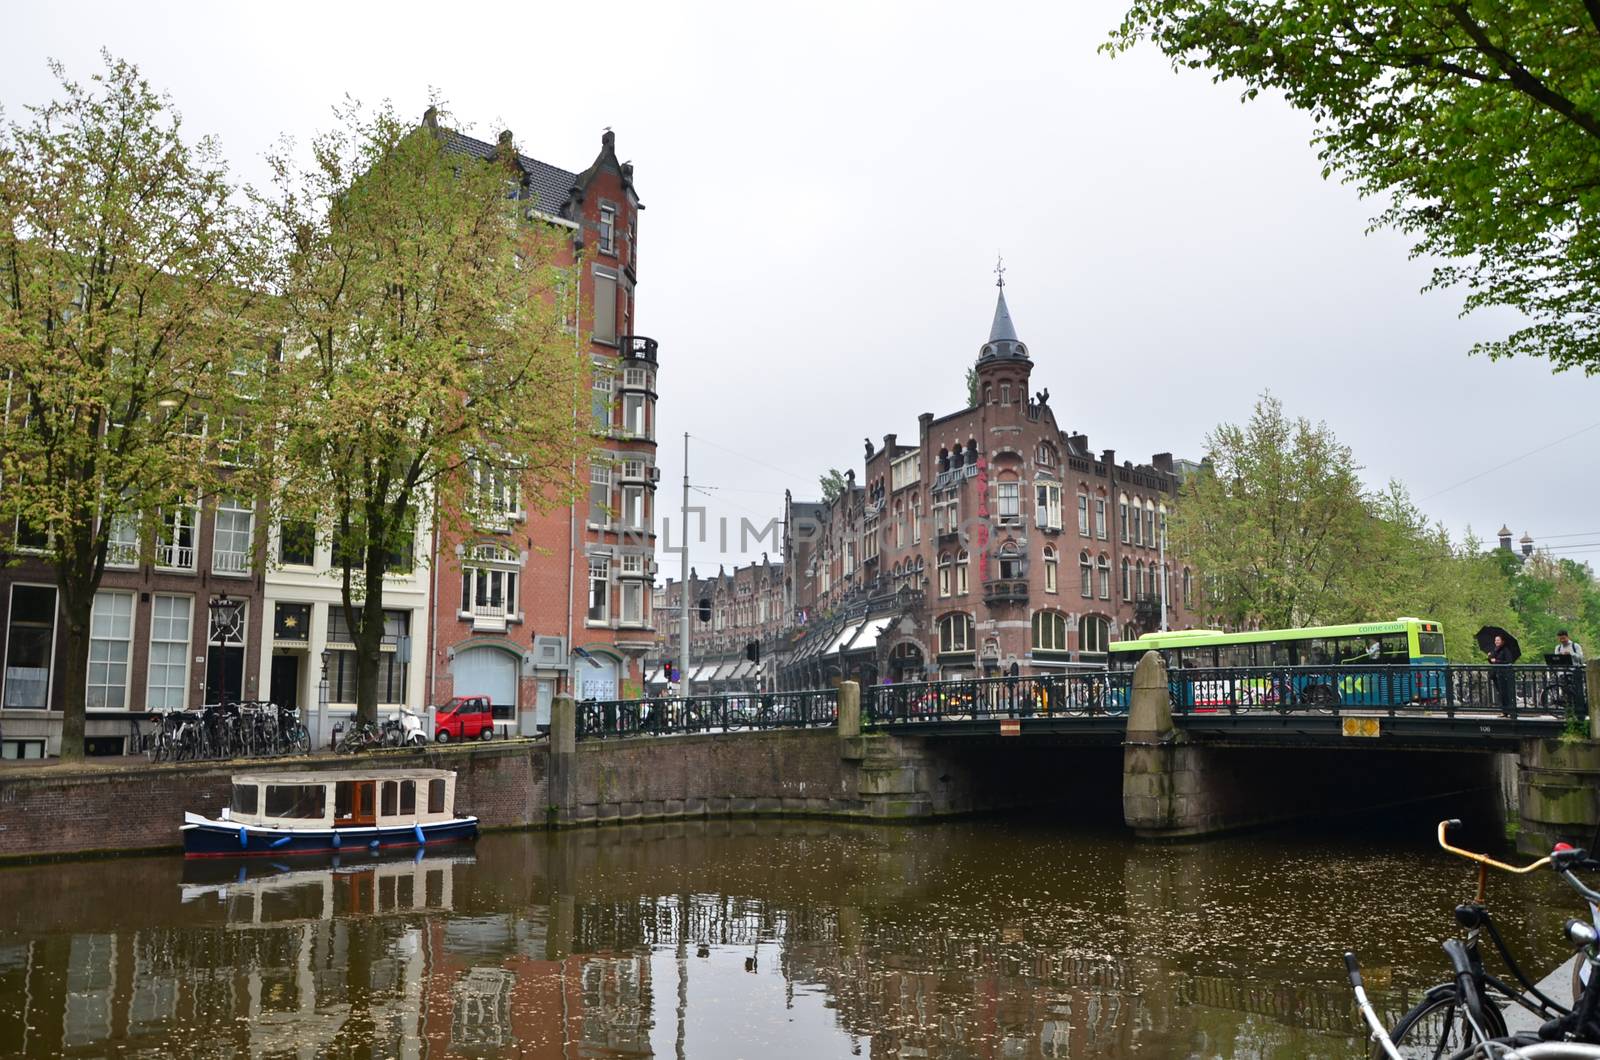 Amsterdam, Netherlands - May 16, 2015: People at Westermarkt District in Amsterdam on May 16, 2015. Amsterdam is the capital and most populous city of the Netherlands.